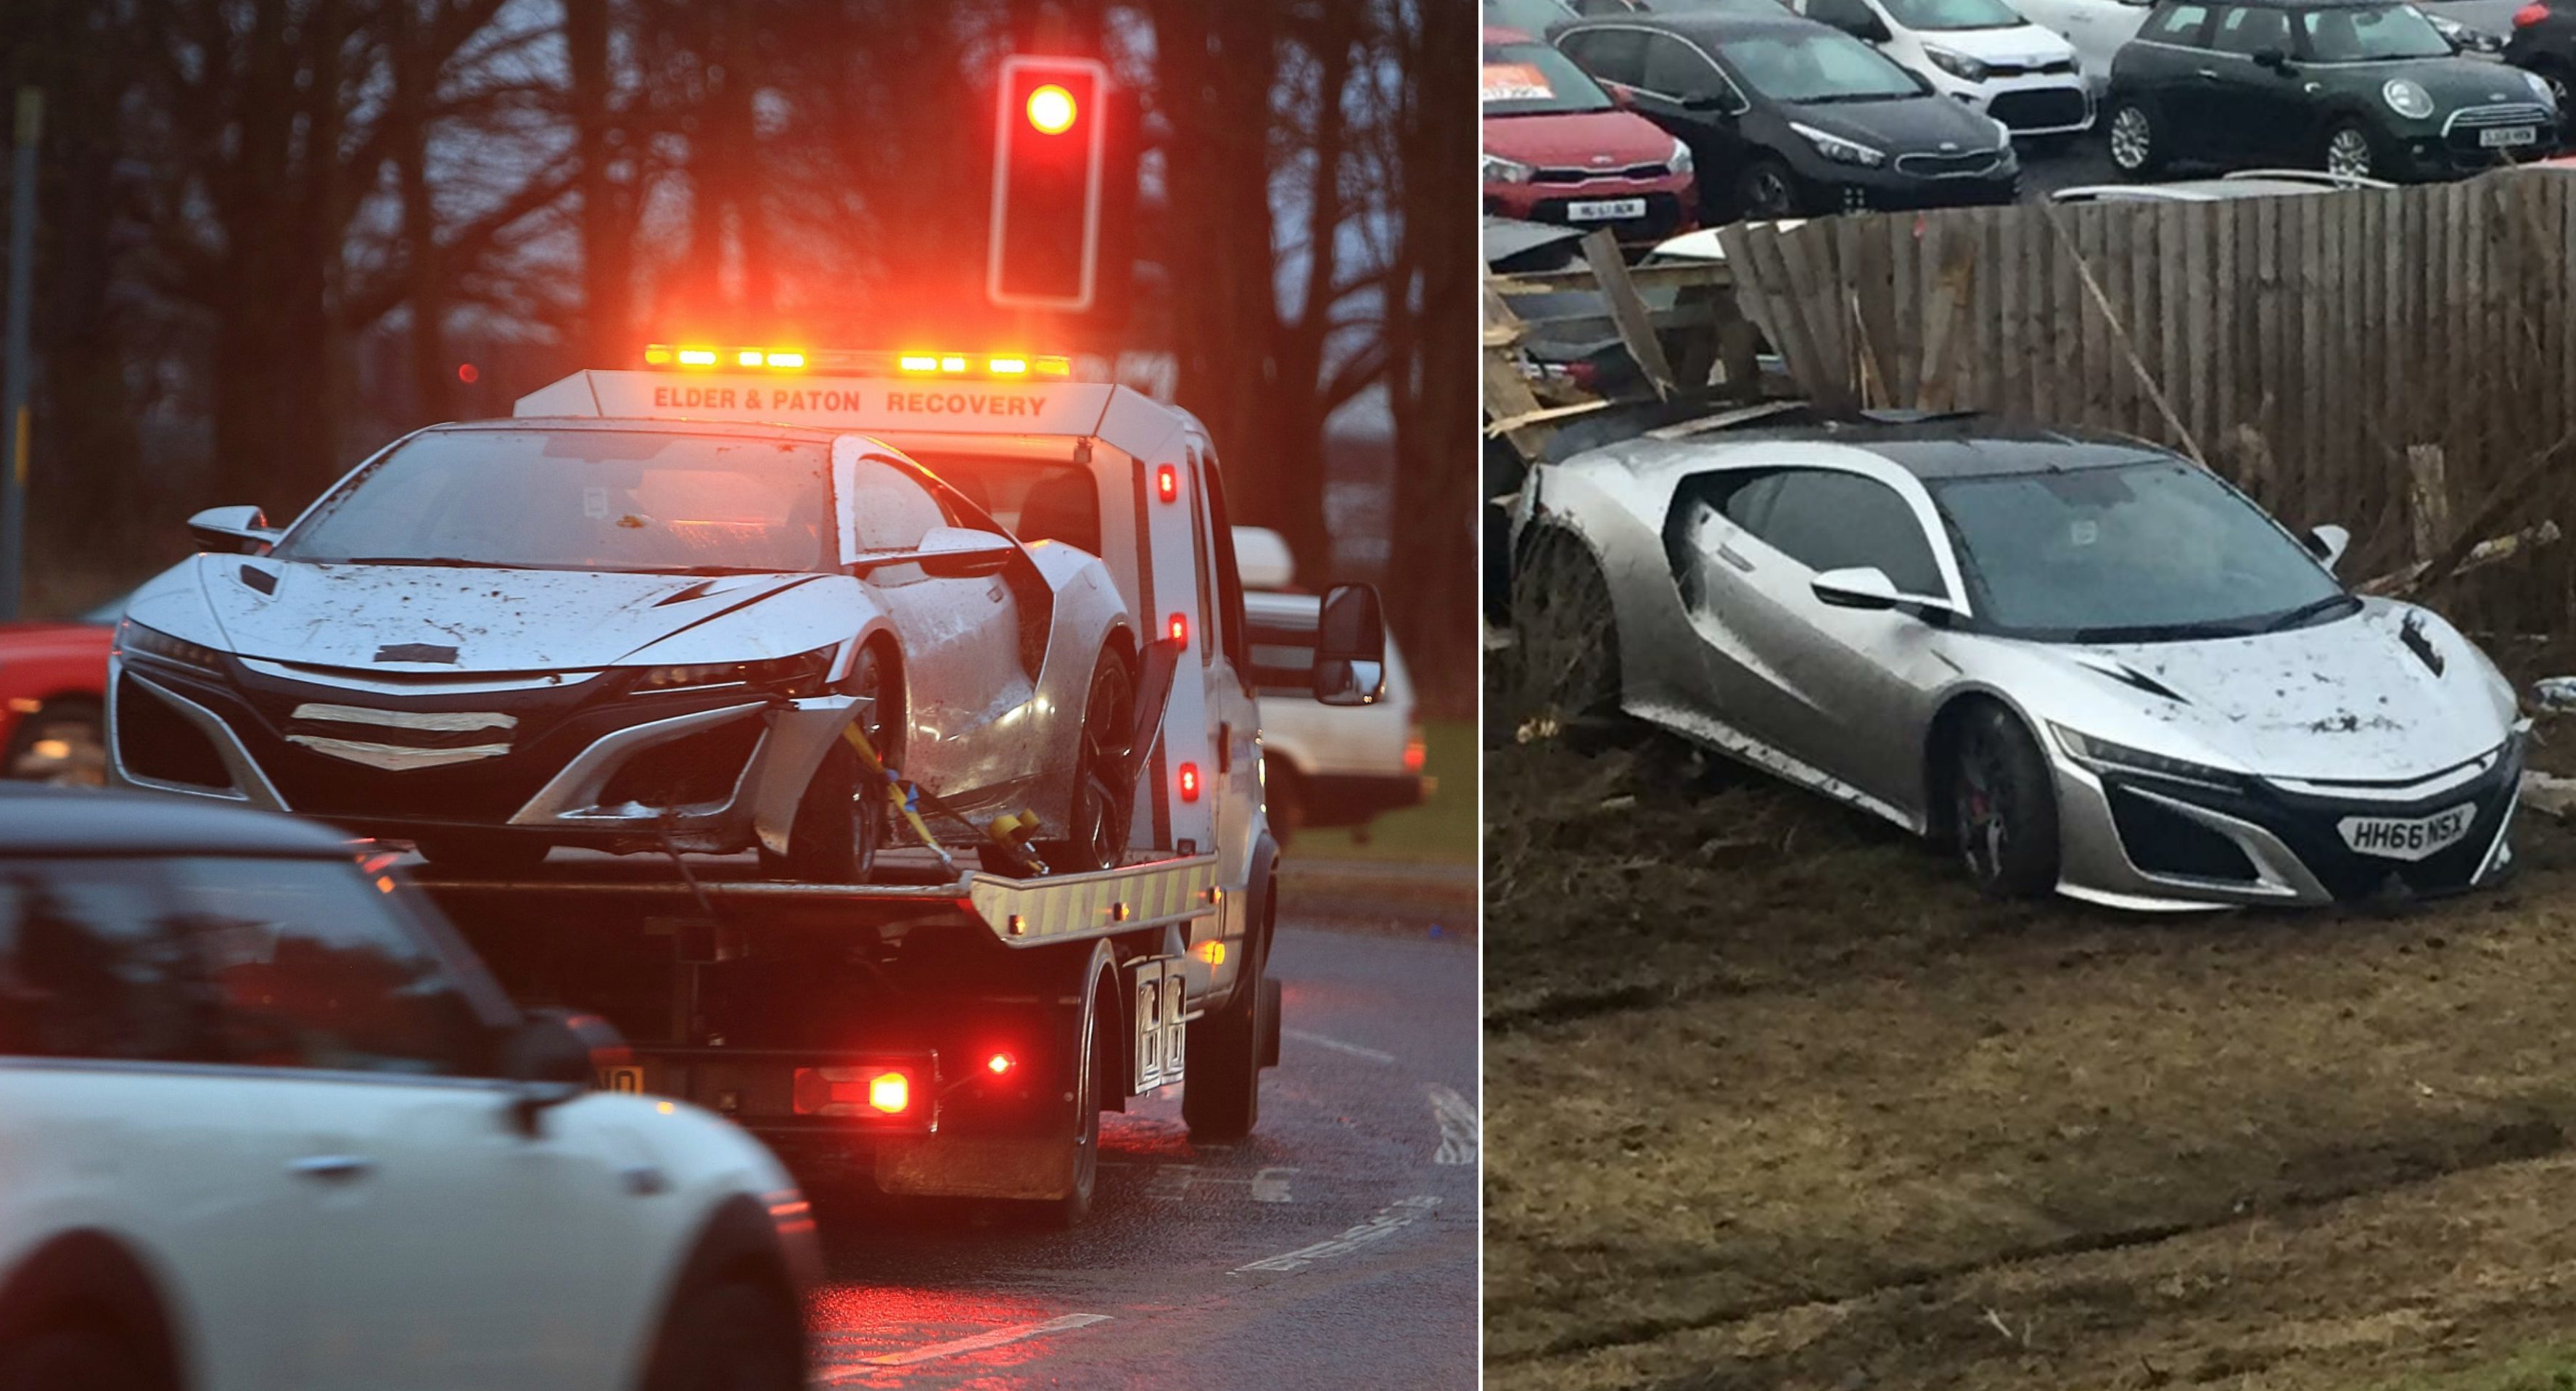 The Honda NSX being taken away following the crash (left) and where it crashed (right).